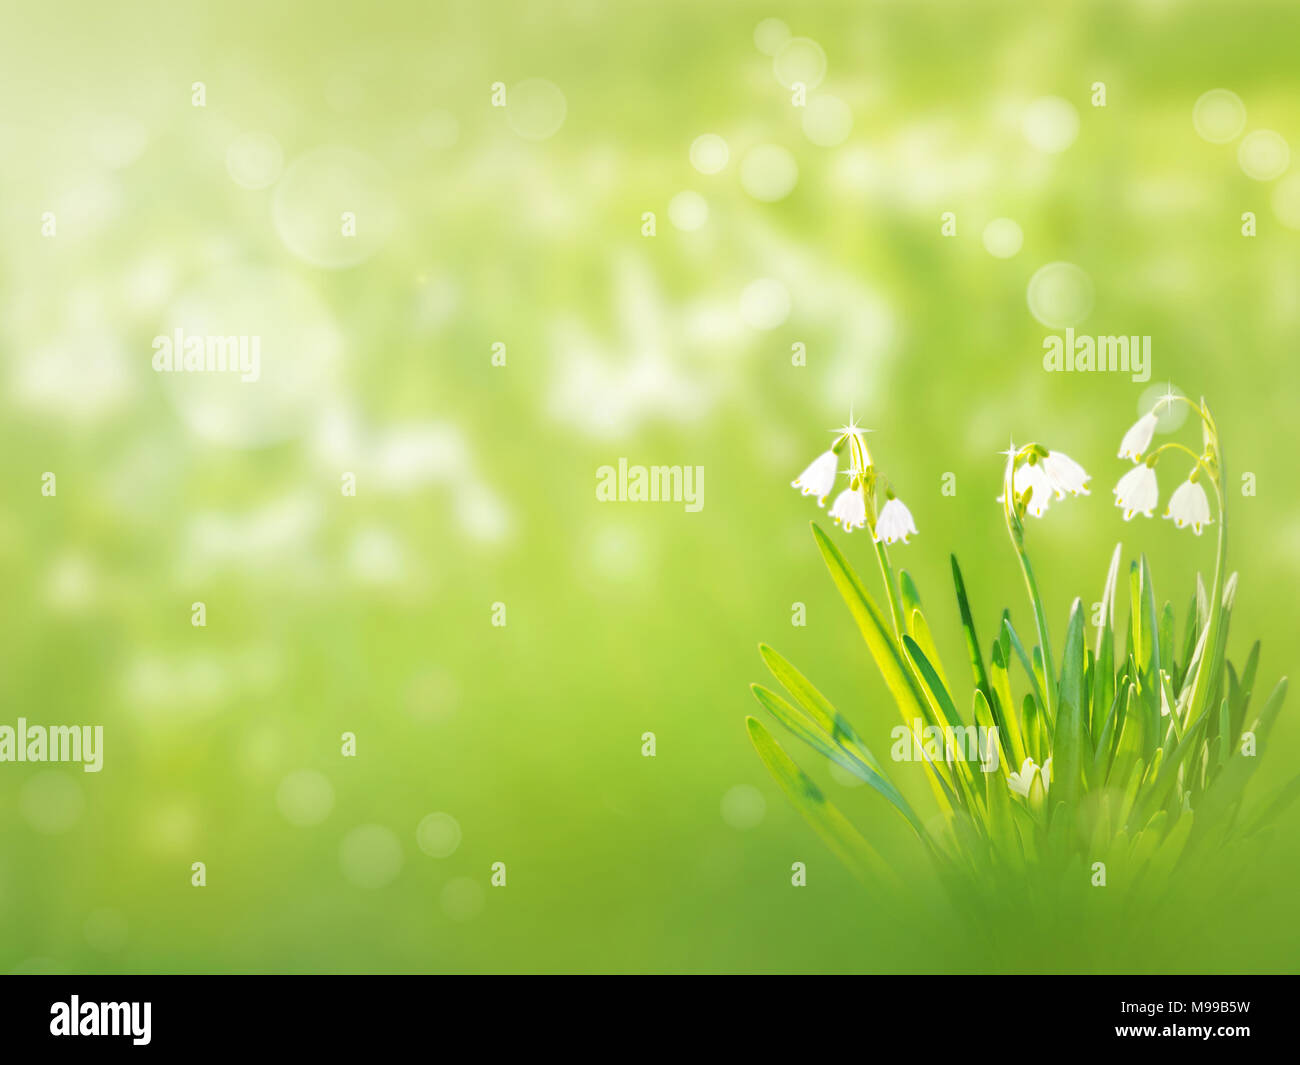 Snowdrop or galanthus flowers on the spring blurred garden background Stock Photo